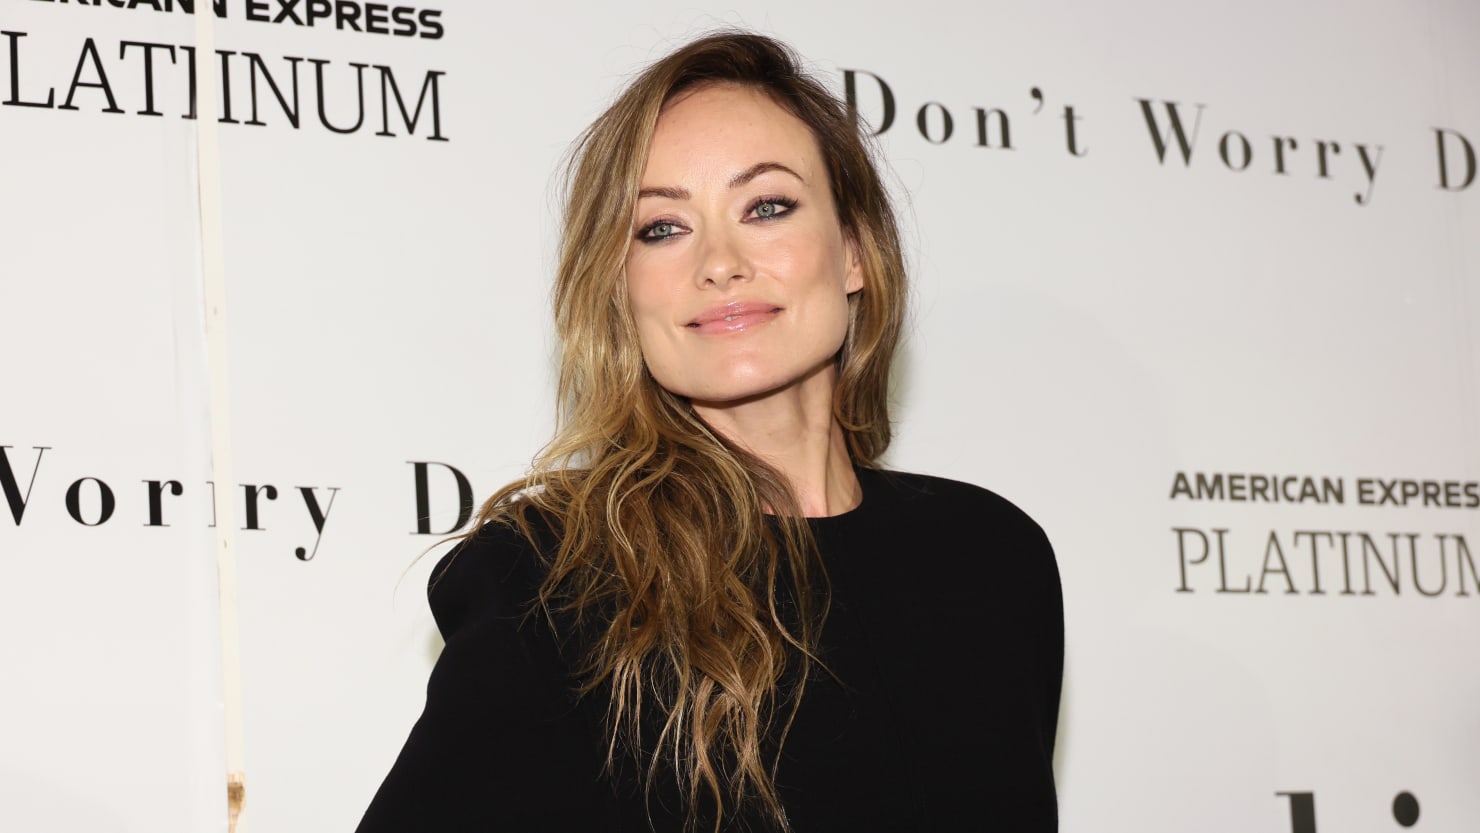 Olivia Wilde's 'Don't Worry Darling' Sex-Scene Comments in 'Elle